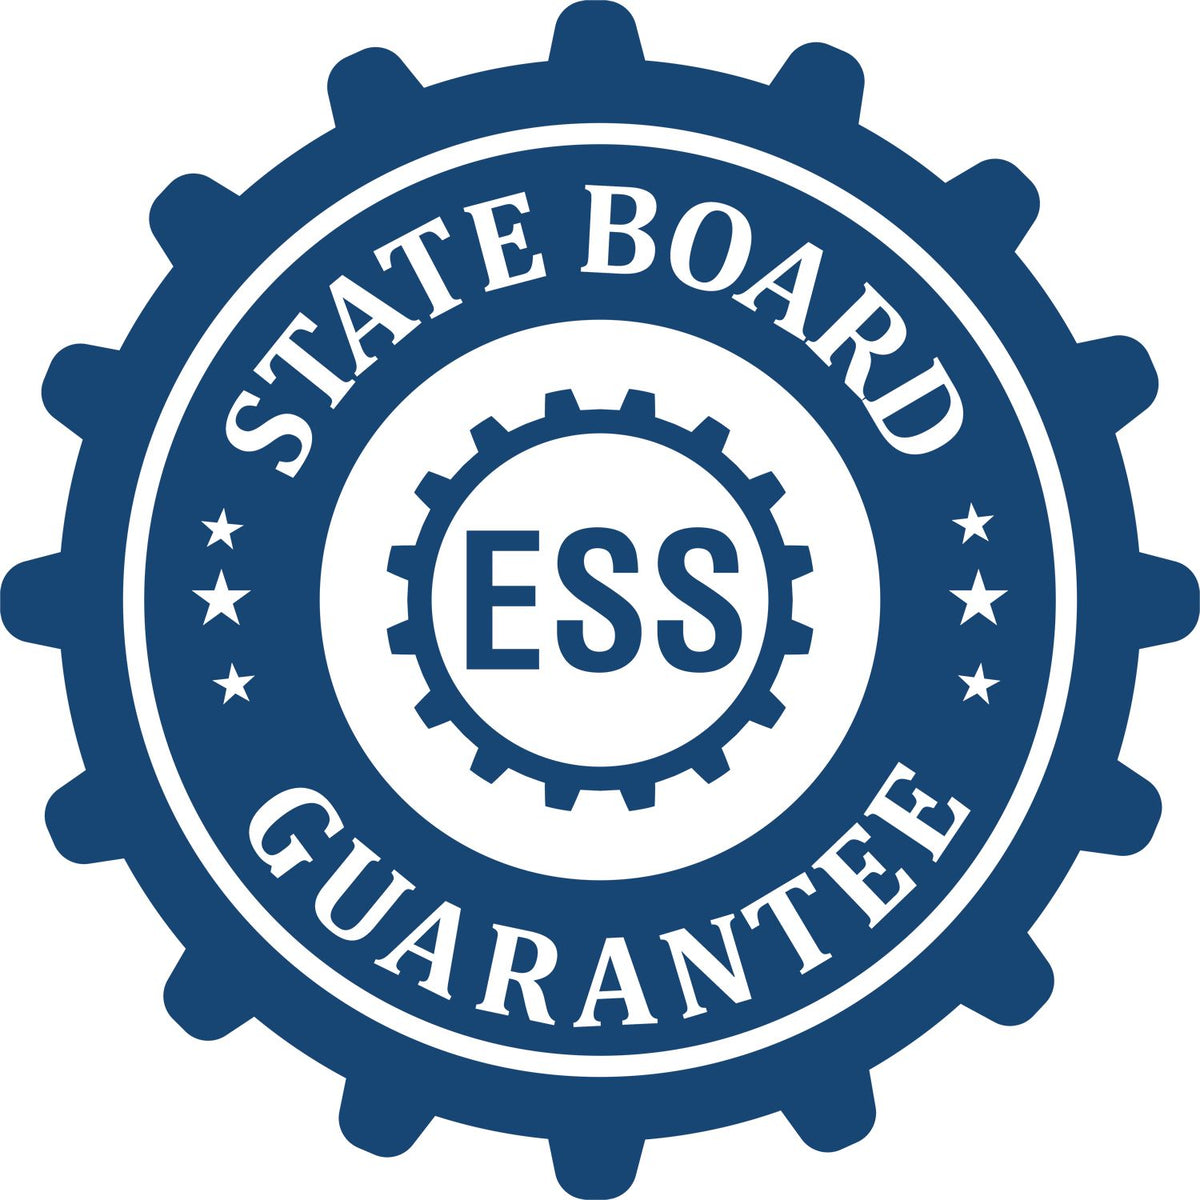 An emblem in a gear shape illustrating a state board guarantee for the Hybrid Missouri Architect Seal